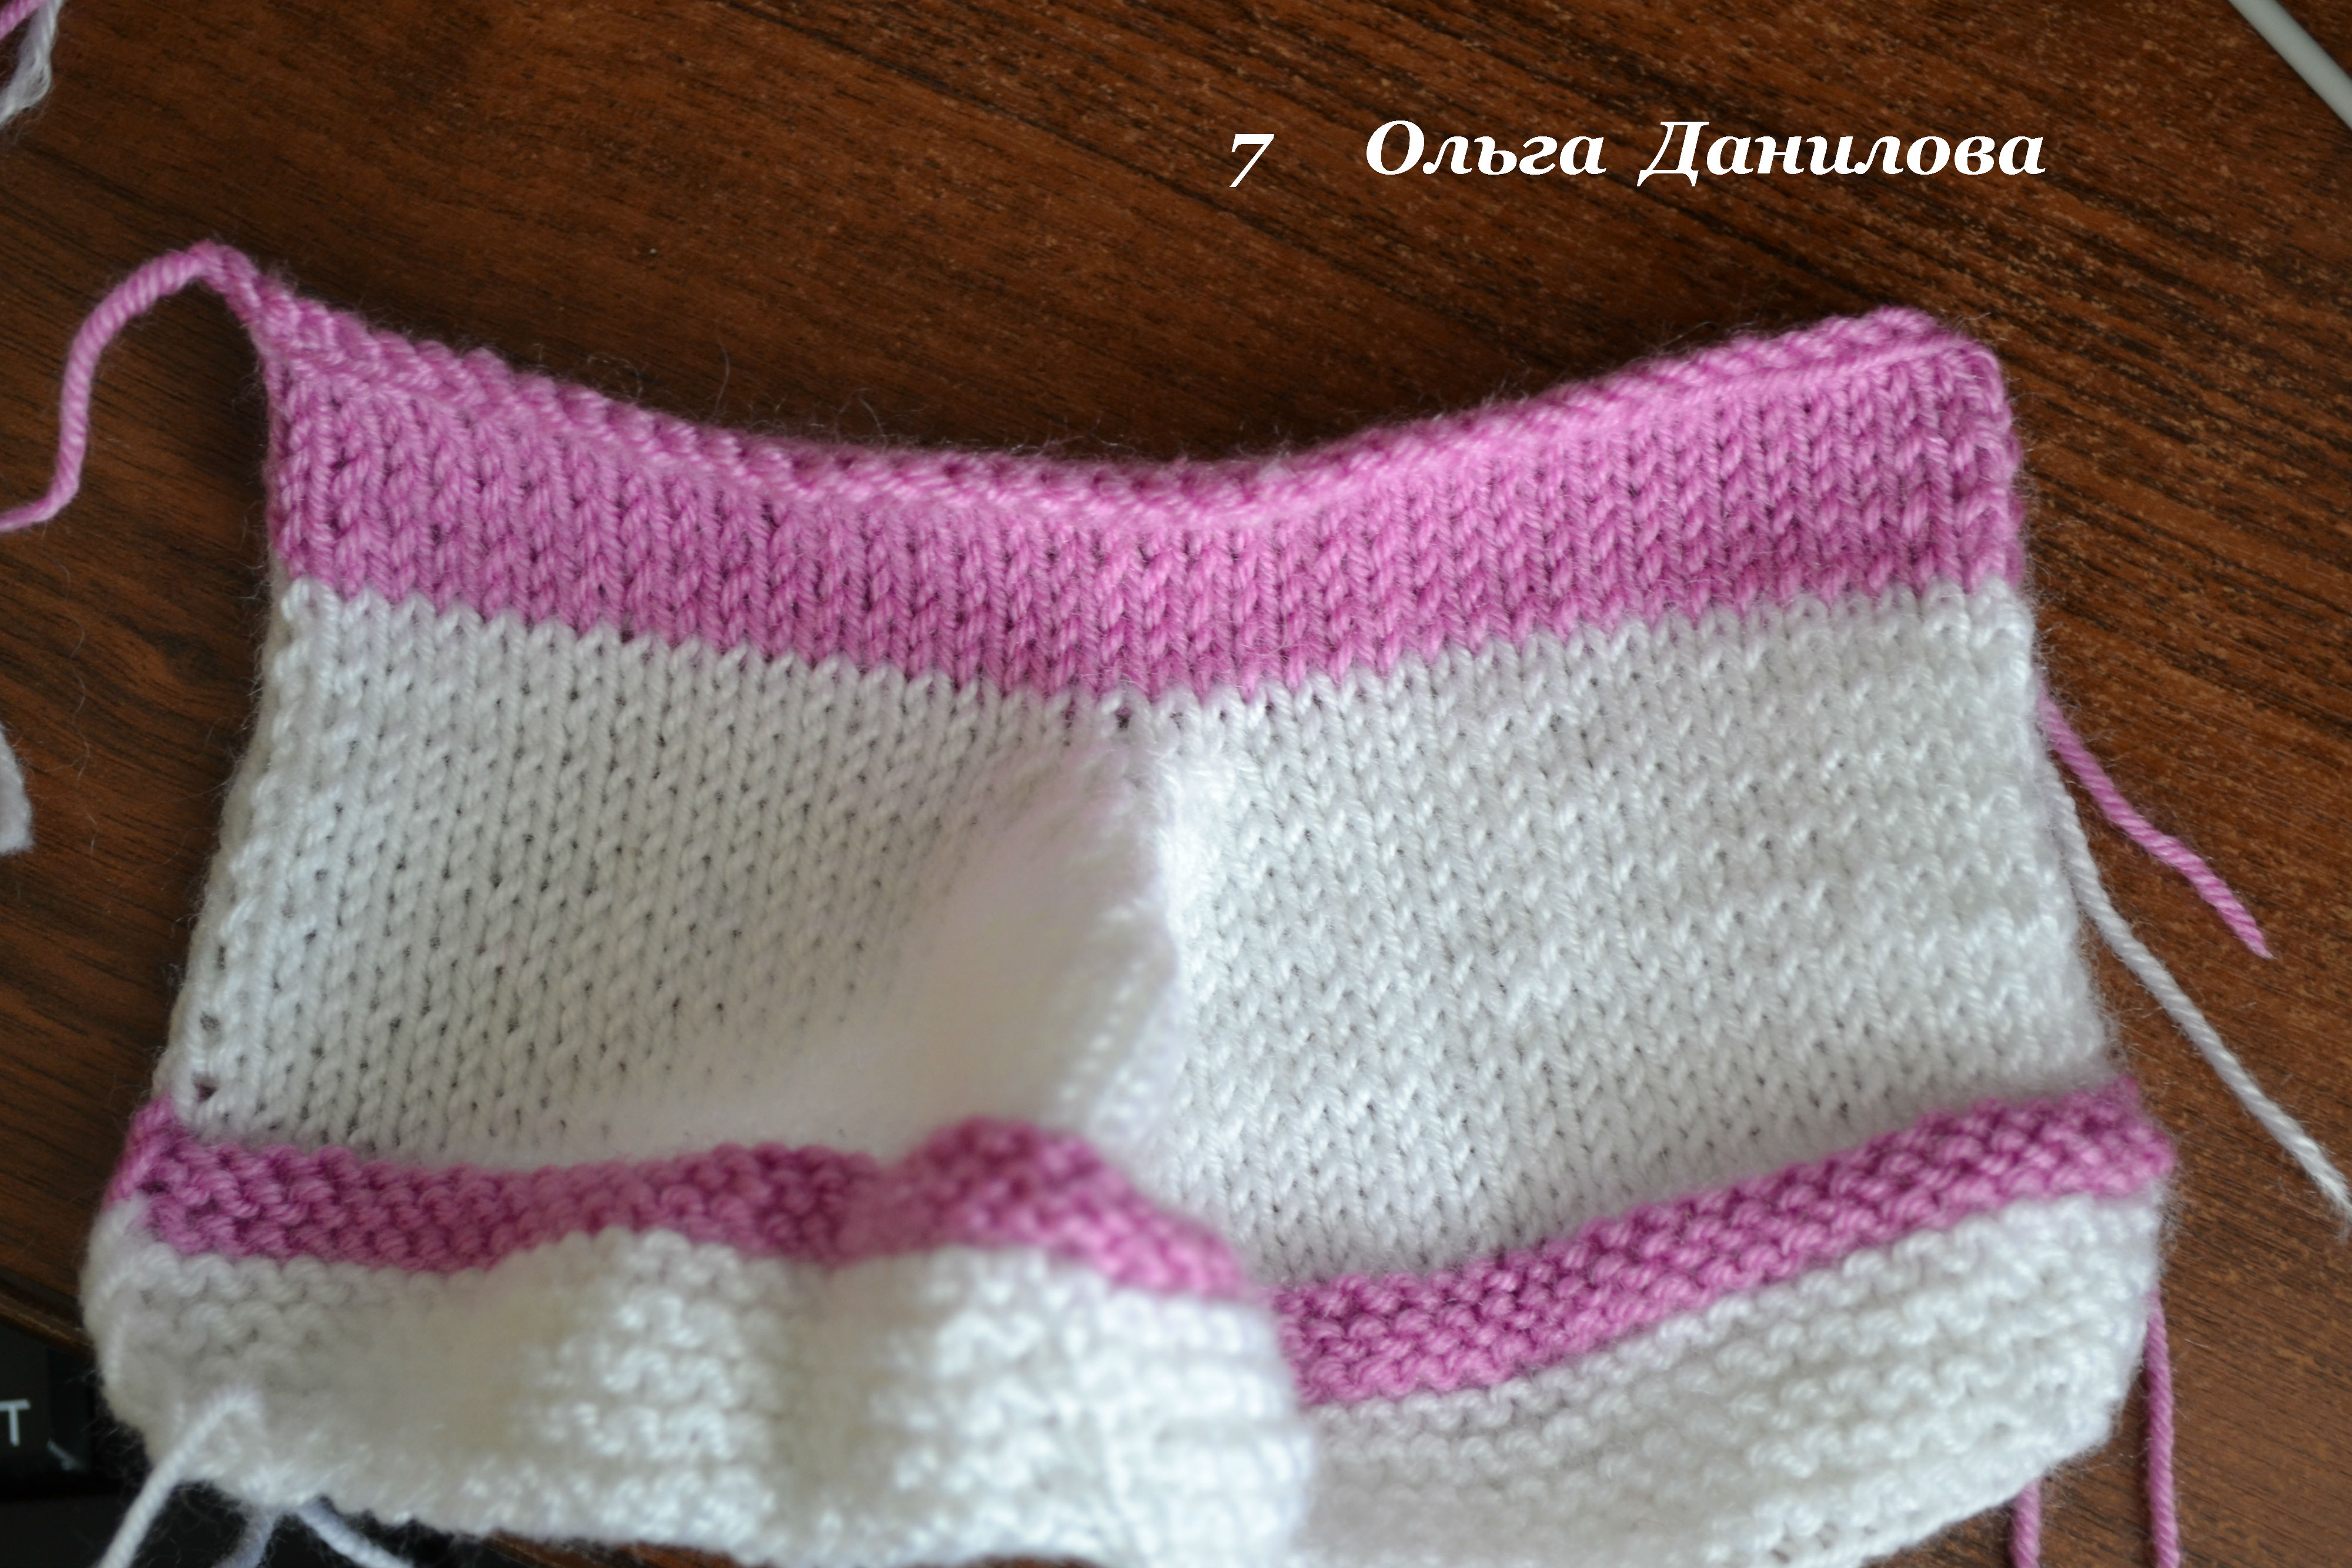 How-to-Make-Pretty-Knitted-Baby-Booties-7.jpg